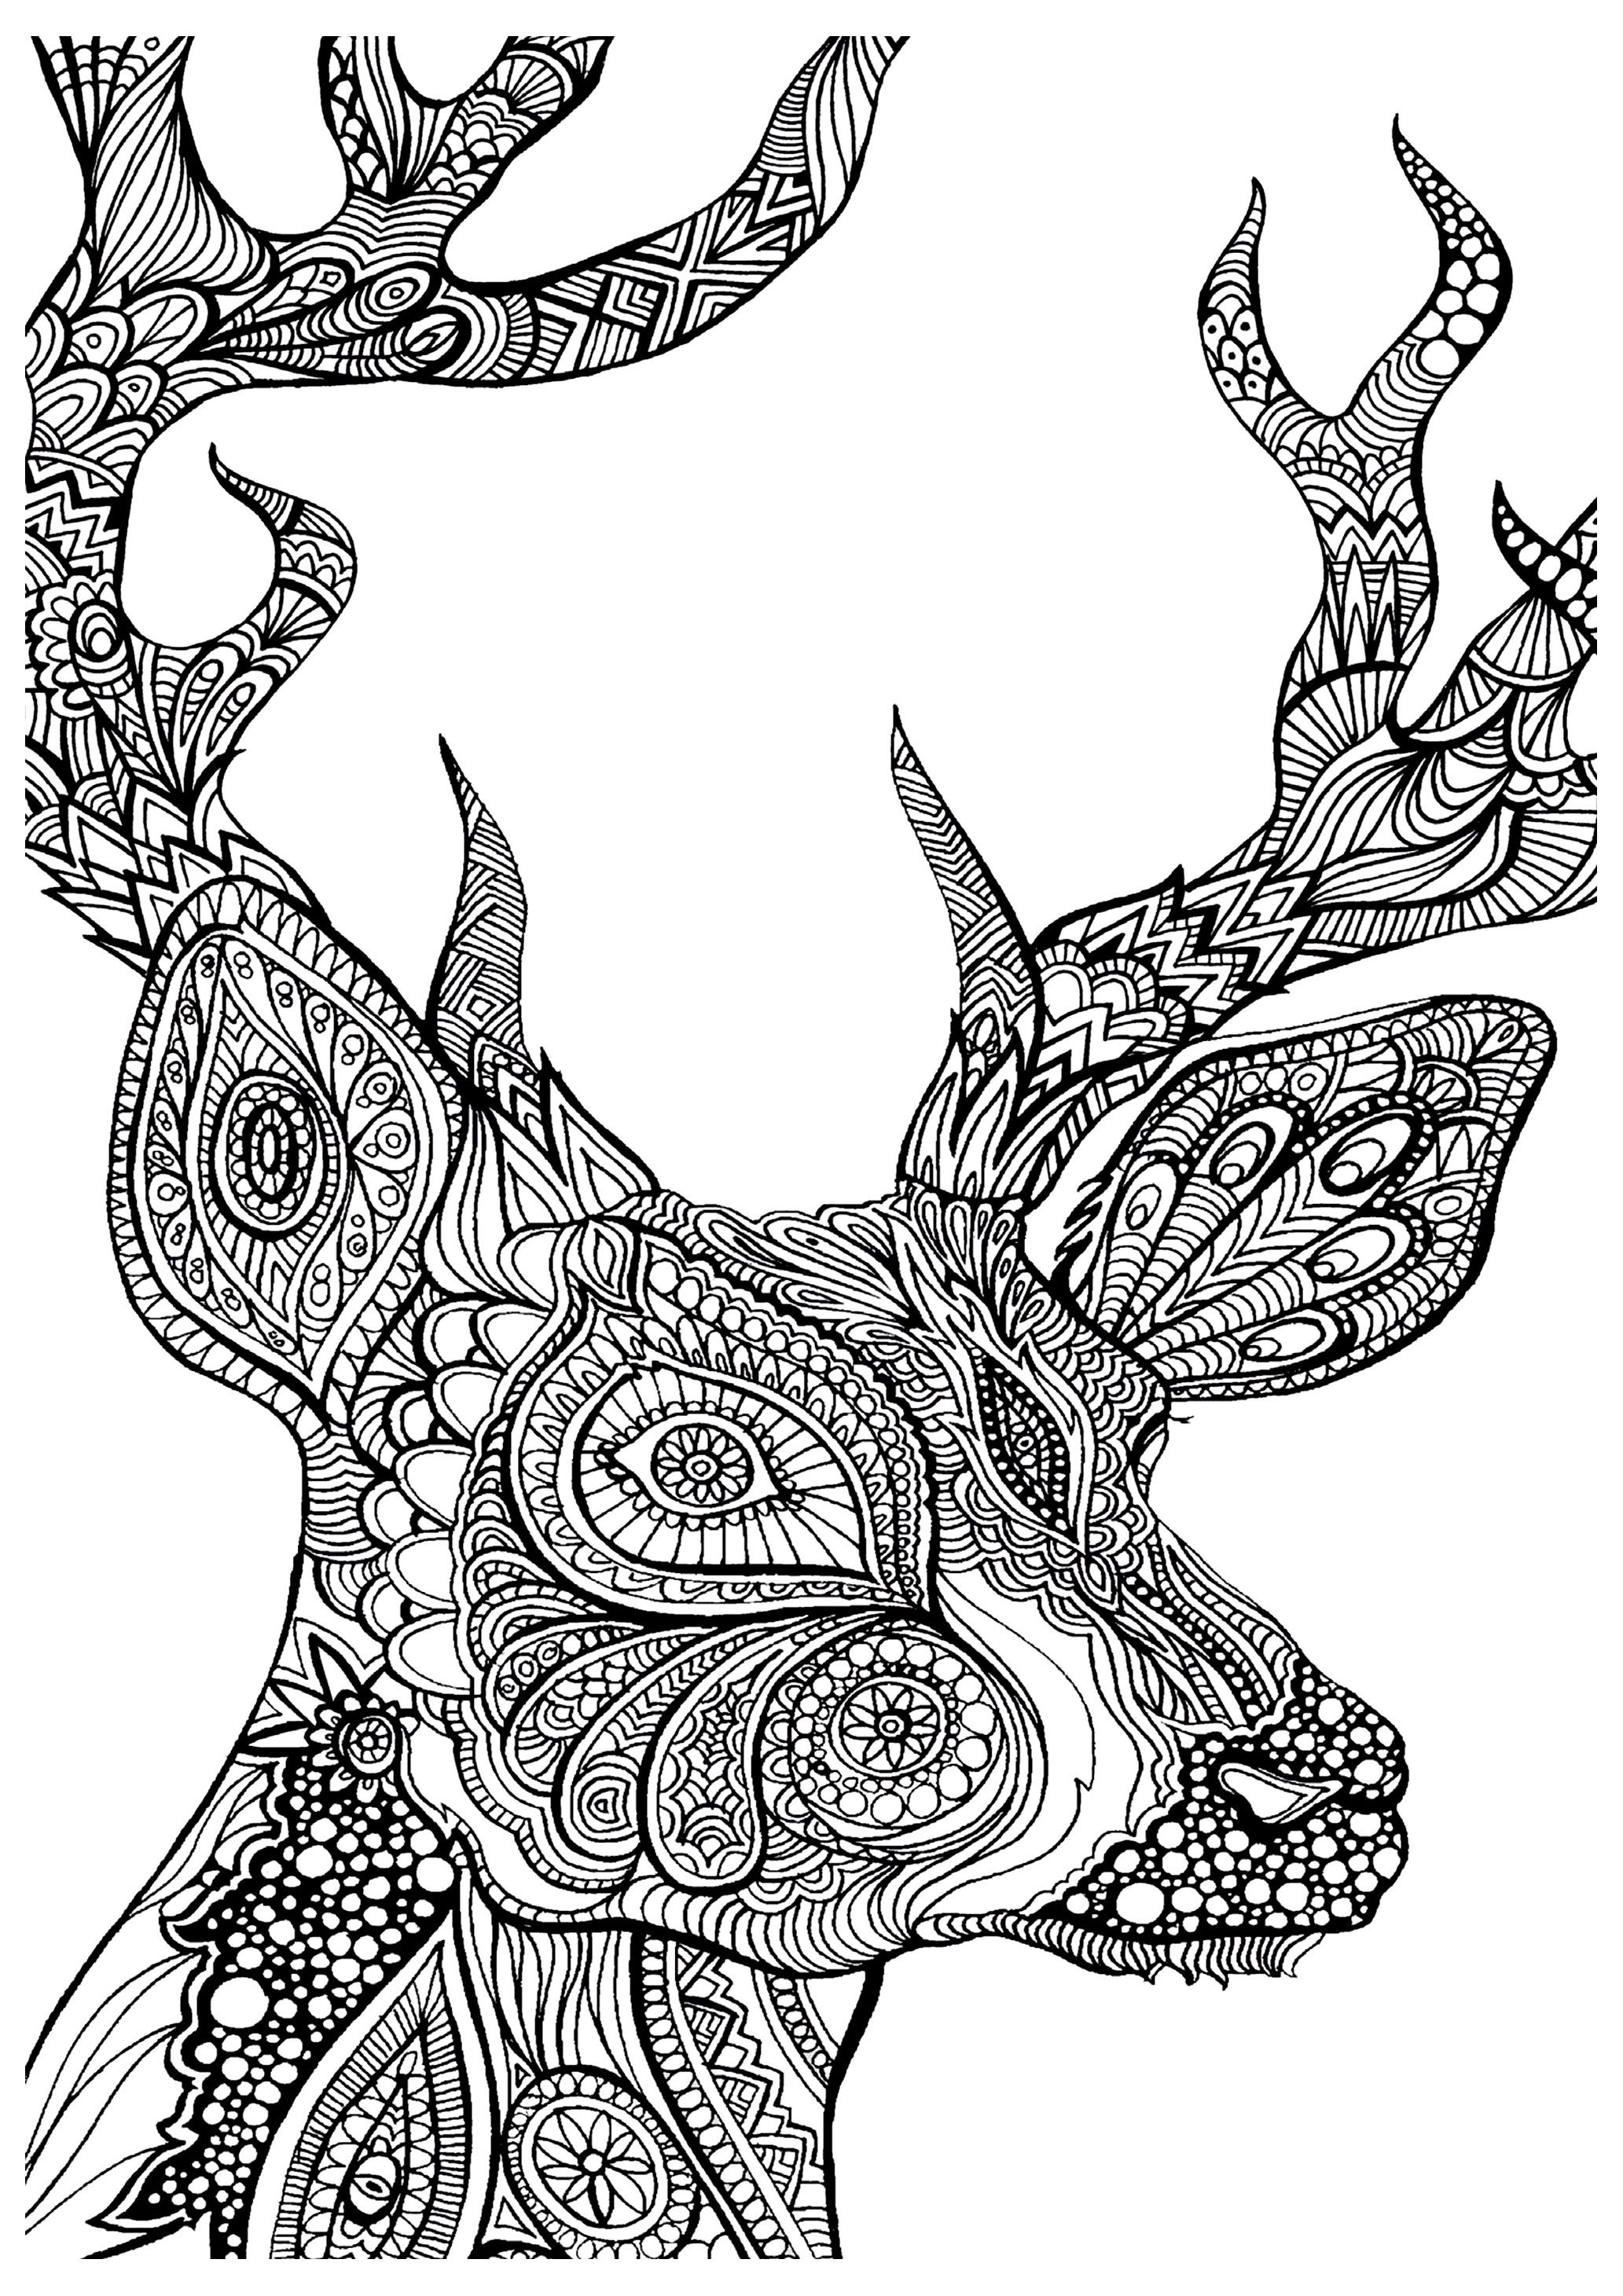 Free Coloring Pages For Adults Animals, Download Free Coloring ...